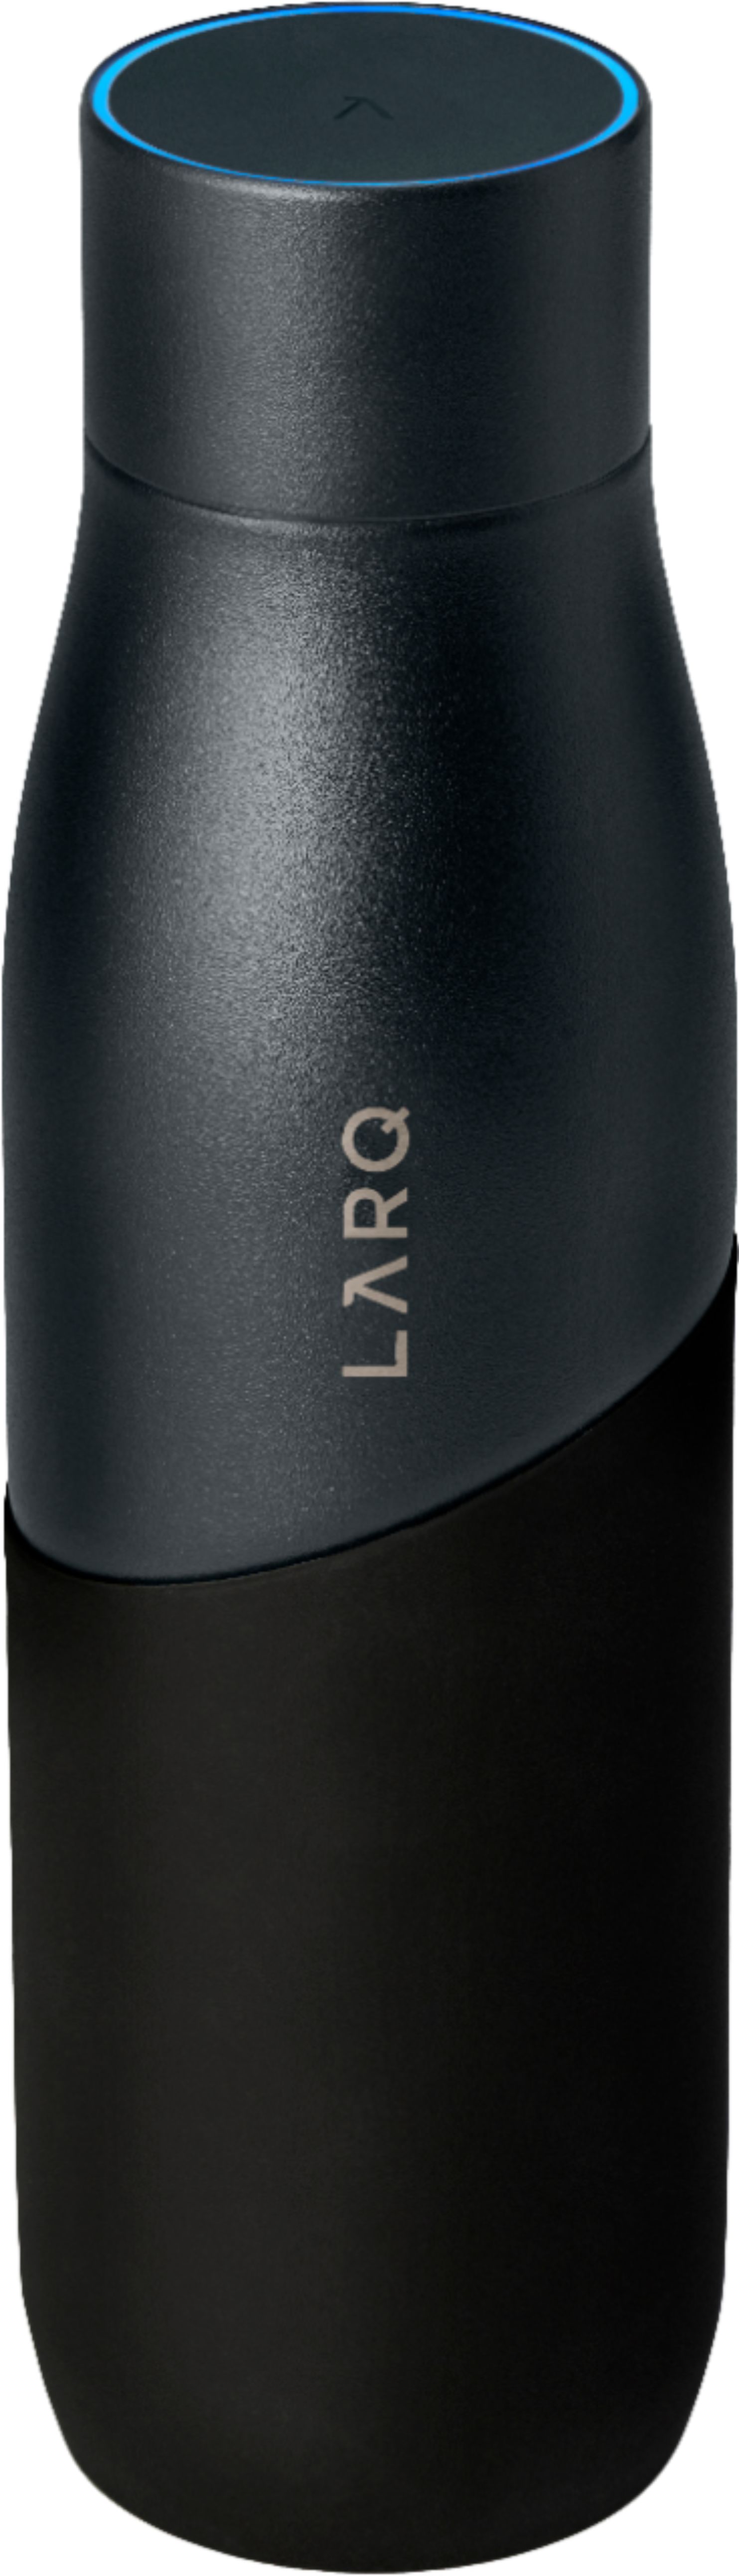 Gear Review: The $100 Self-Cleaning Water Bottle from LARQ – HammockLiving